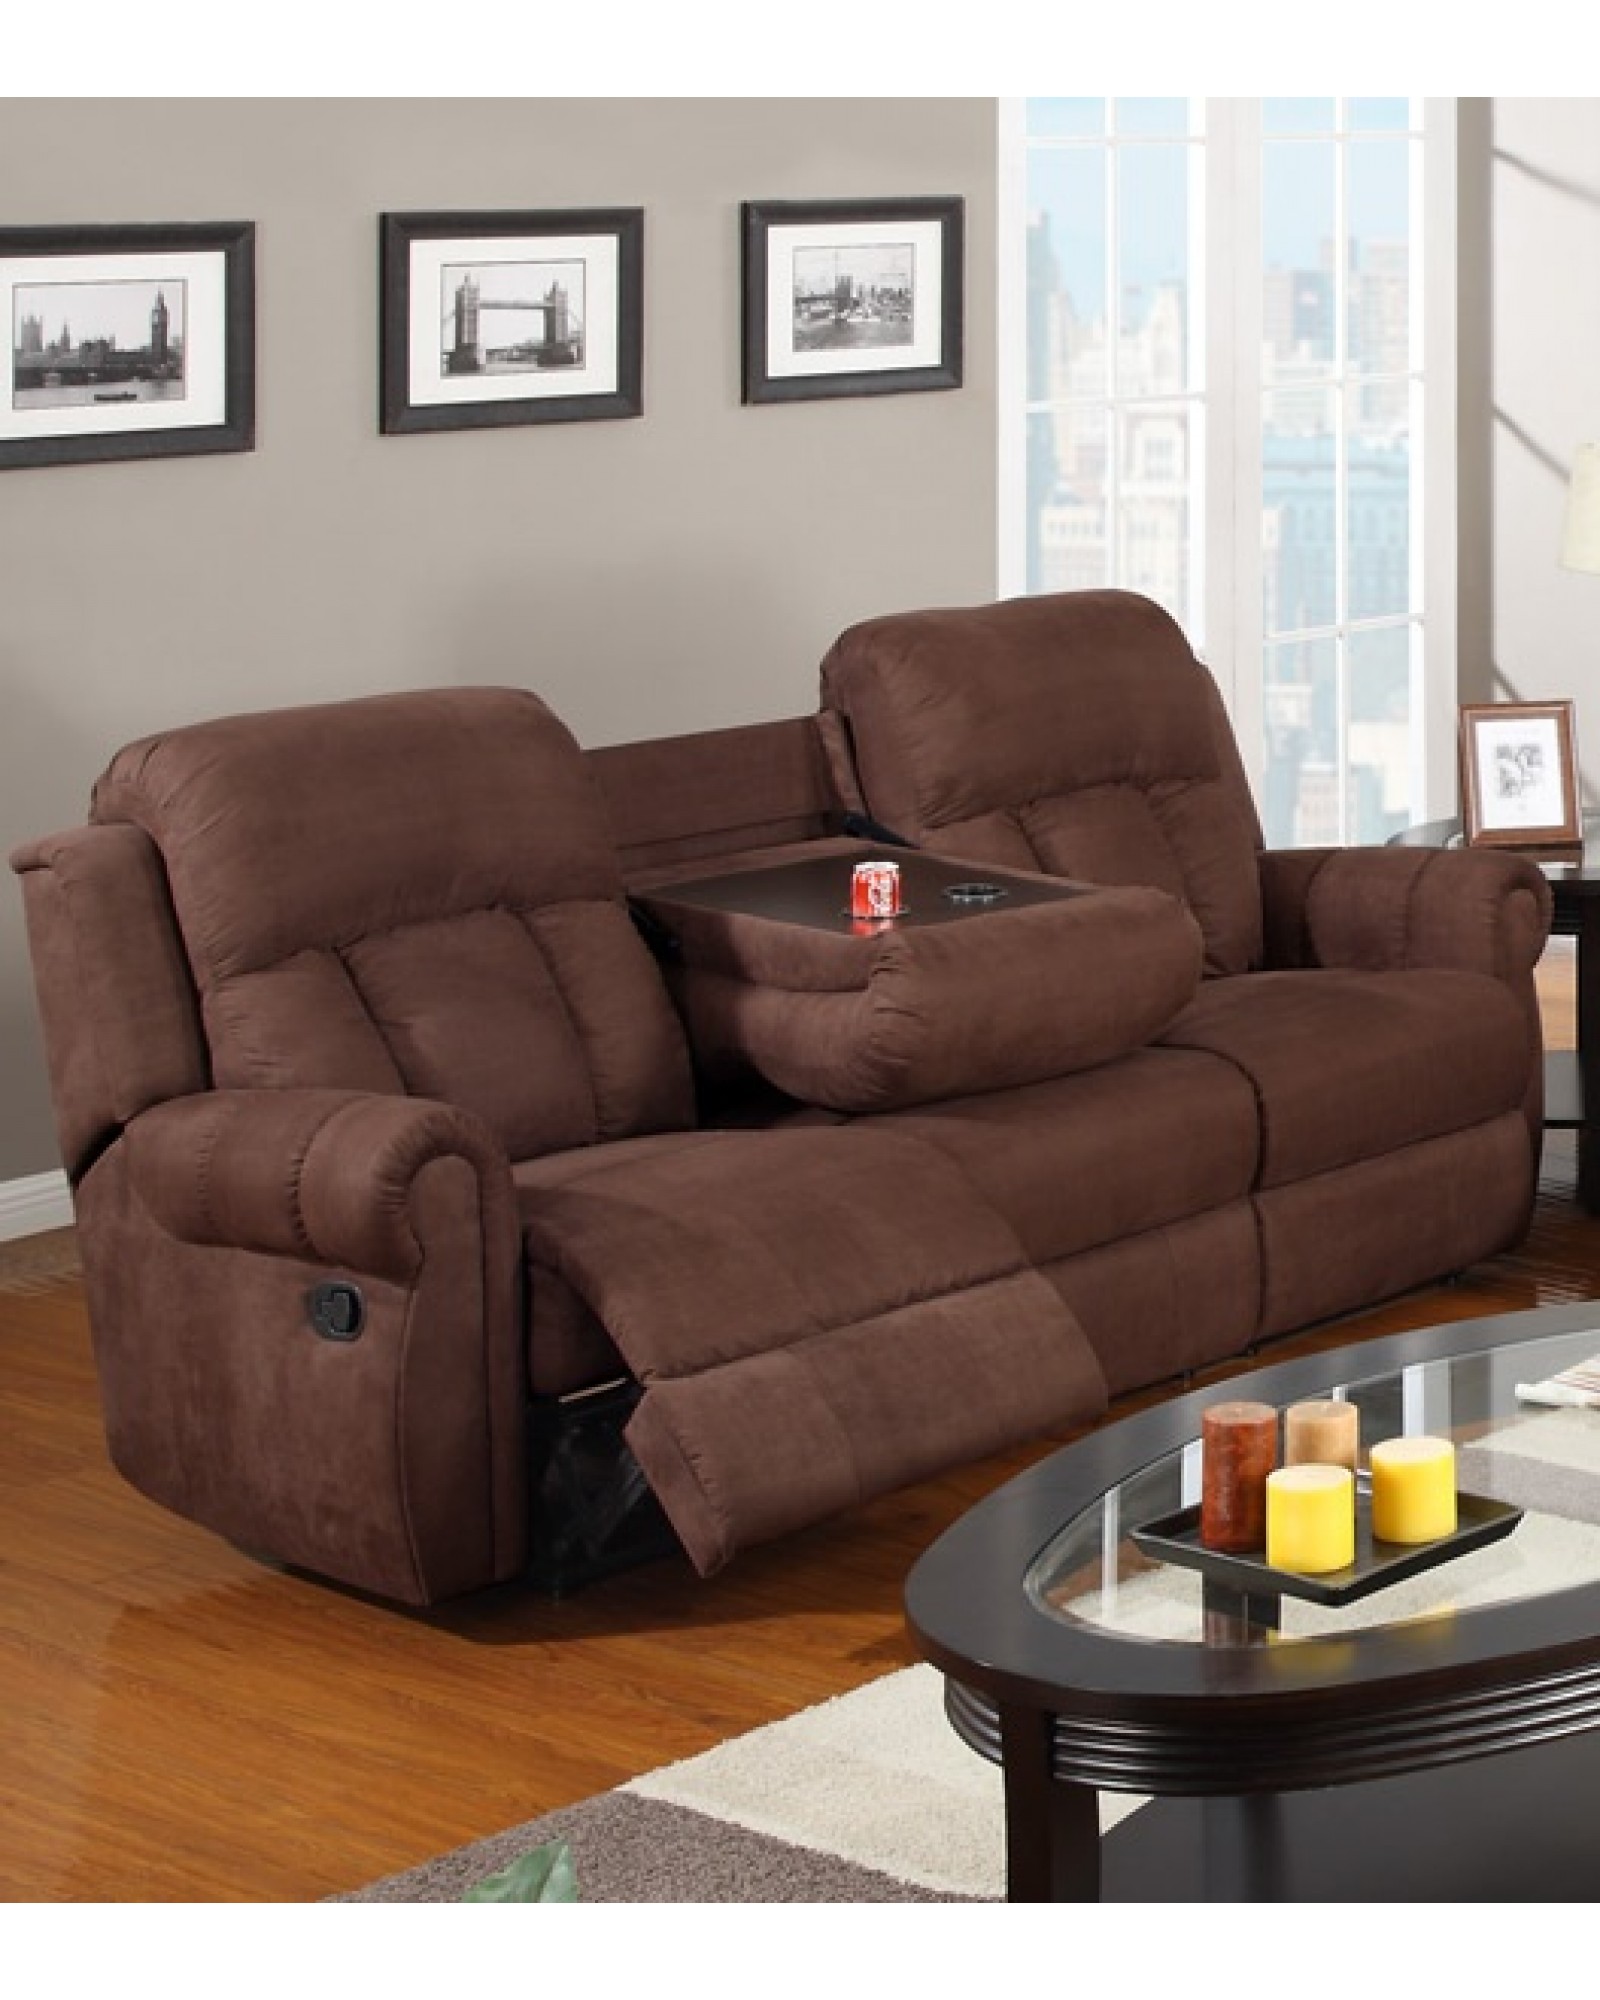 Padded Microfiber Motion Sofa, Loveseat and Recliner, Chocolate